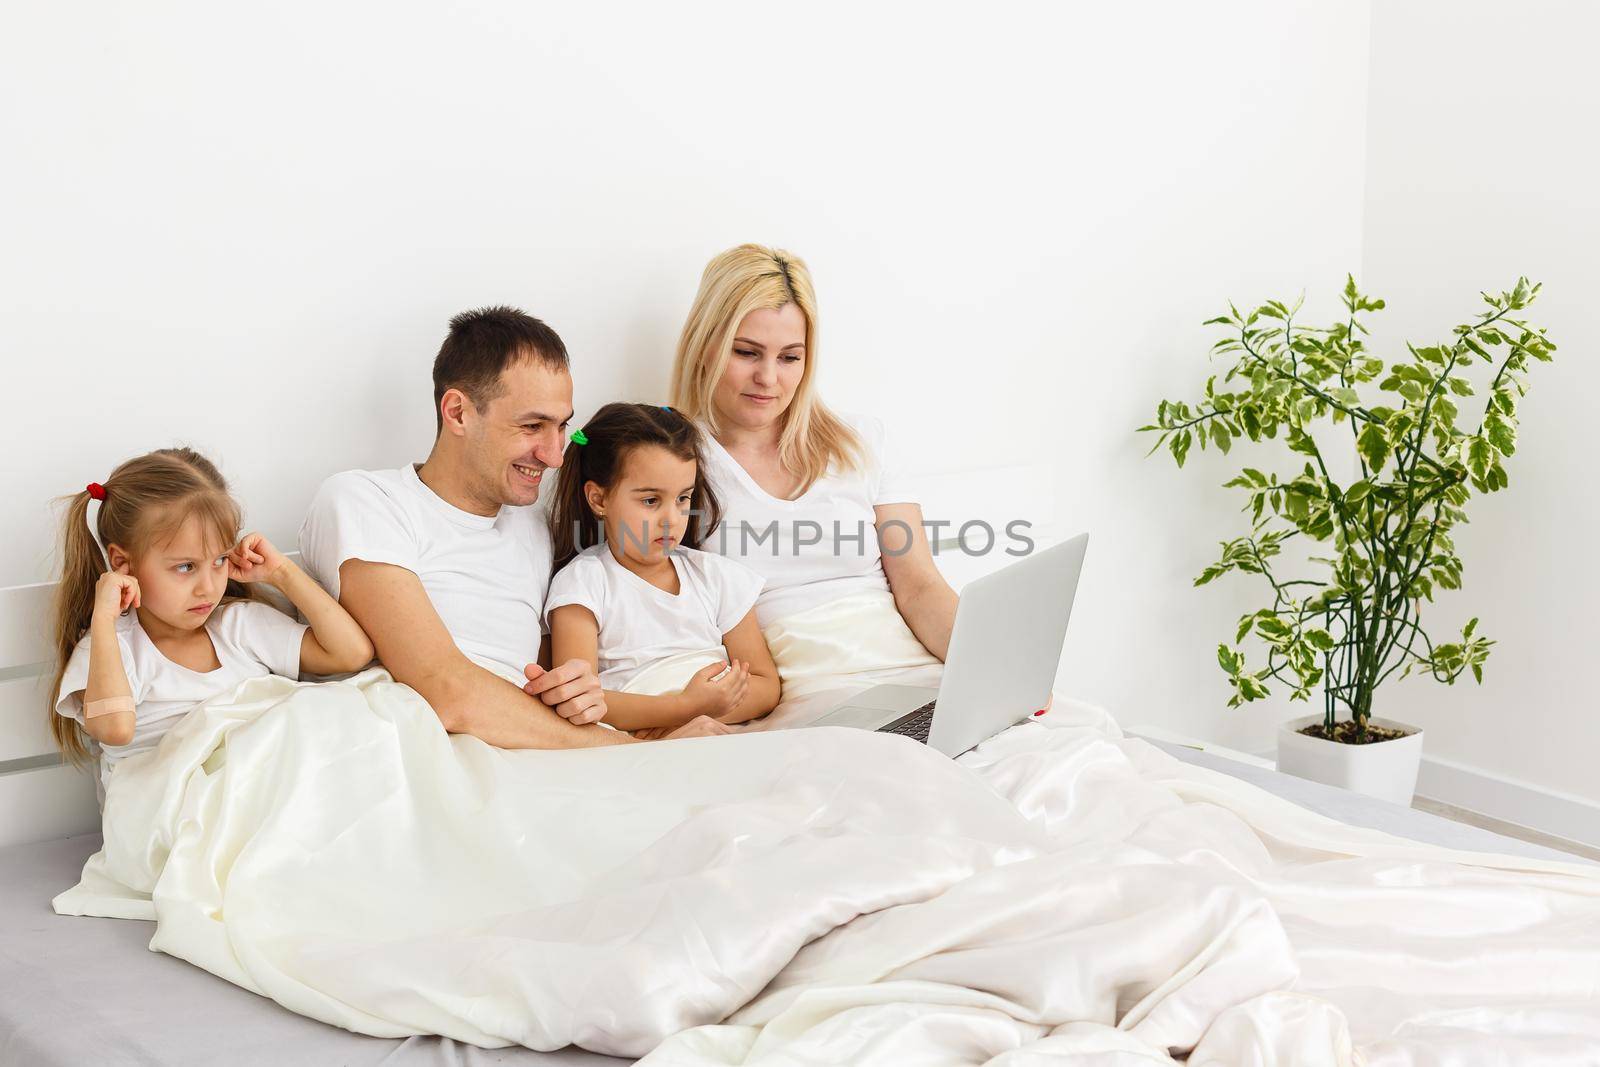 Young family resting together in parent's bed.